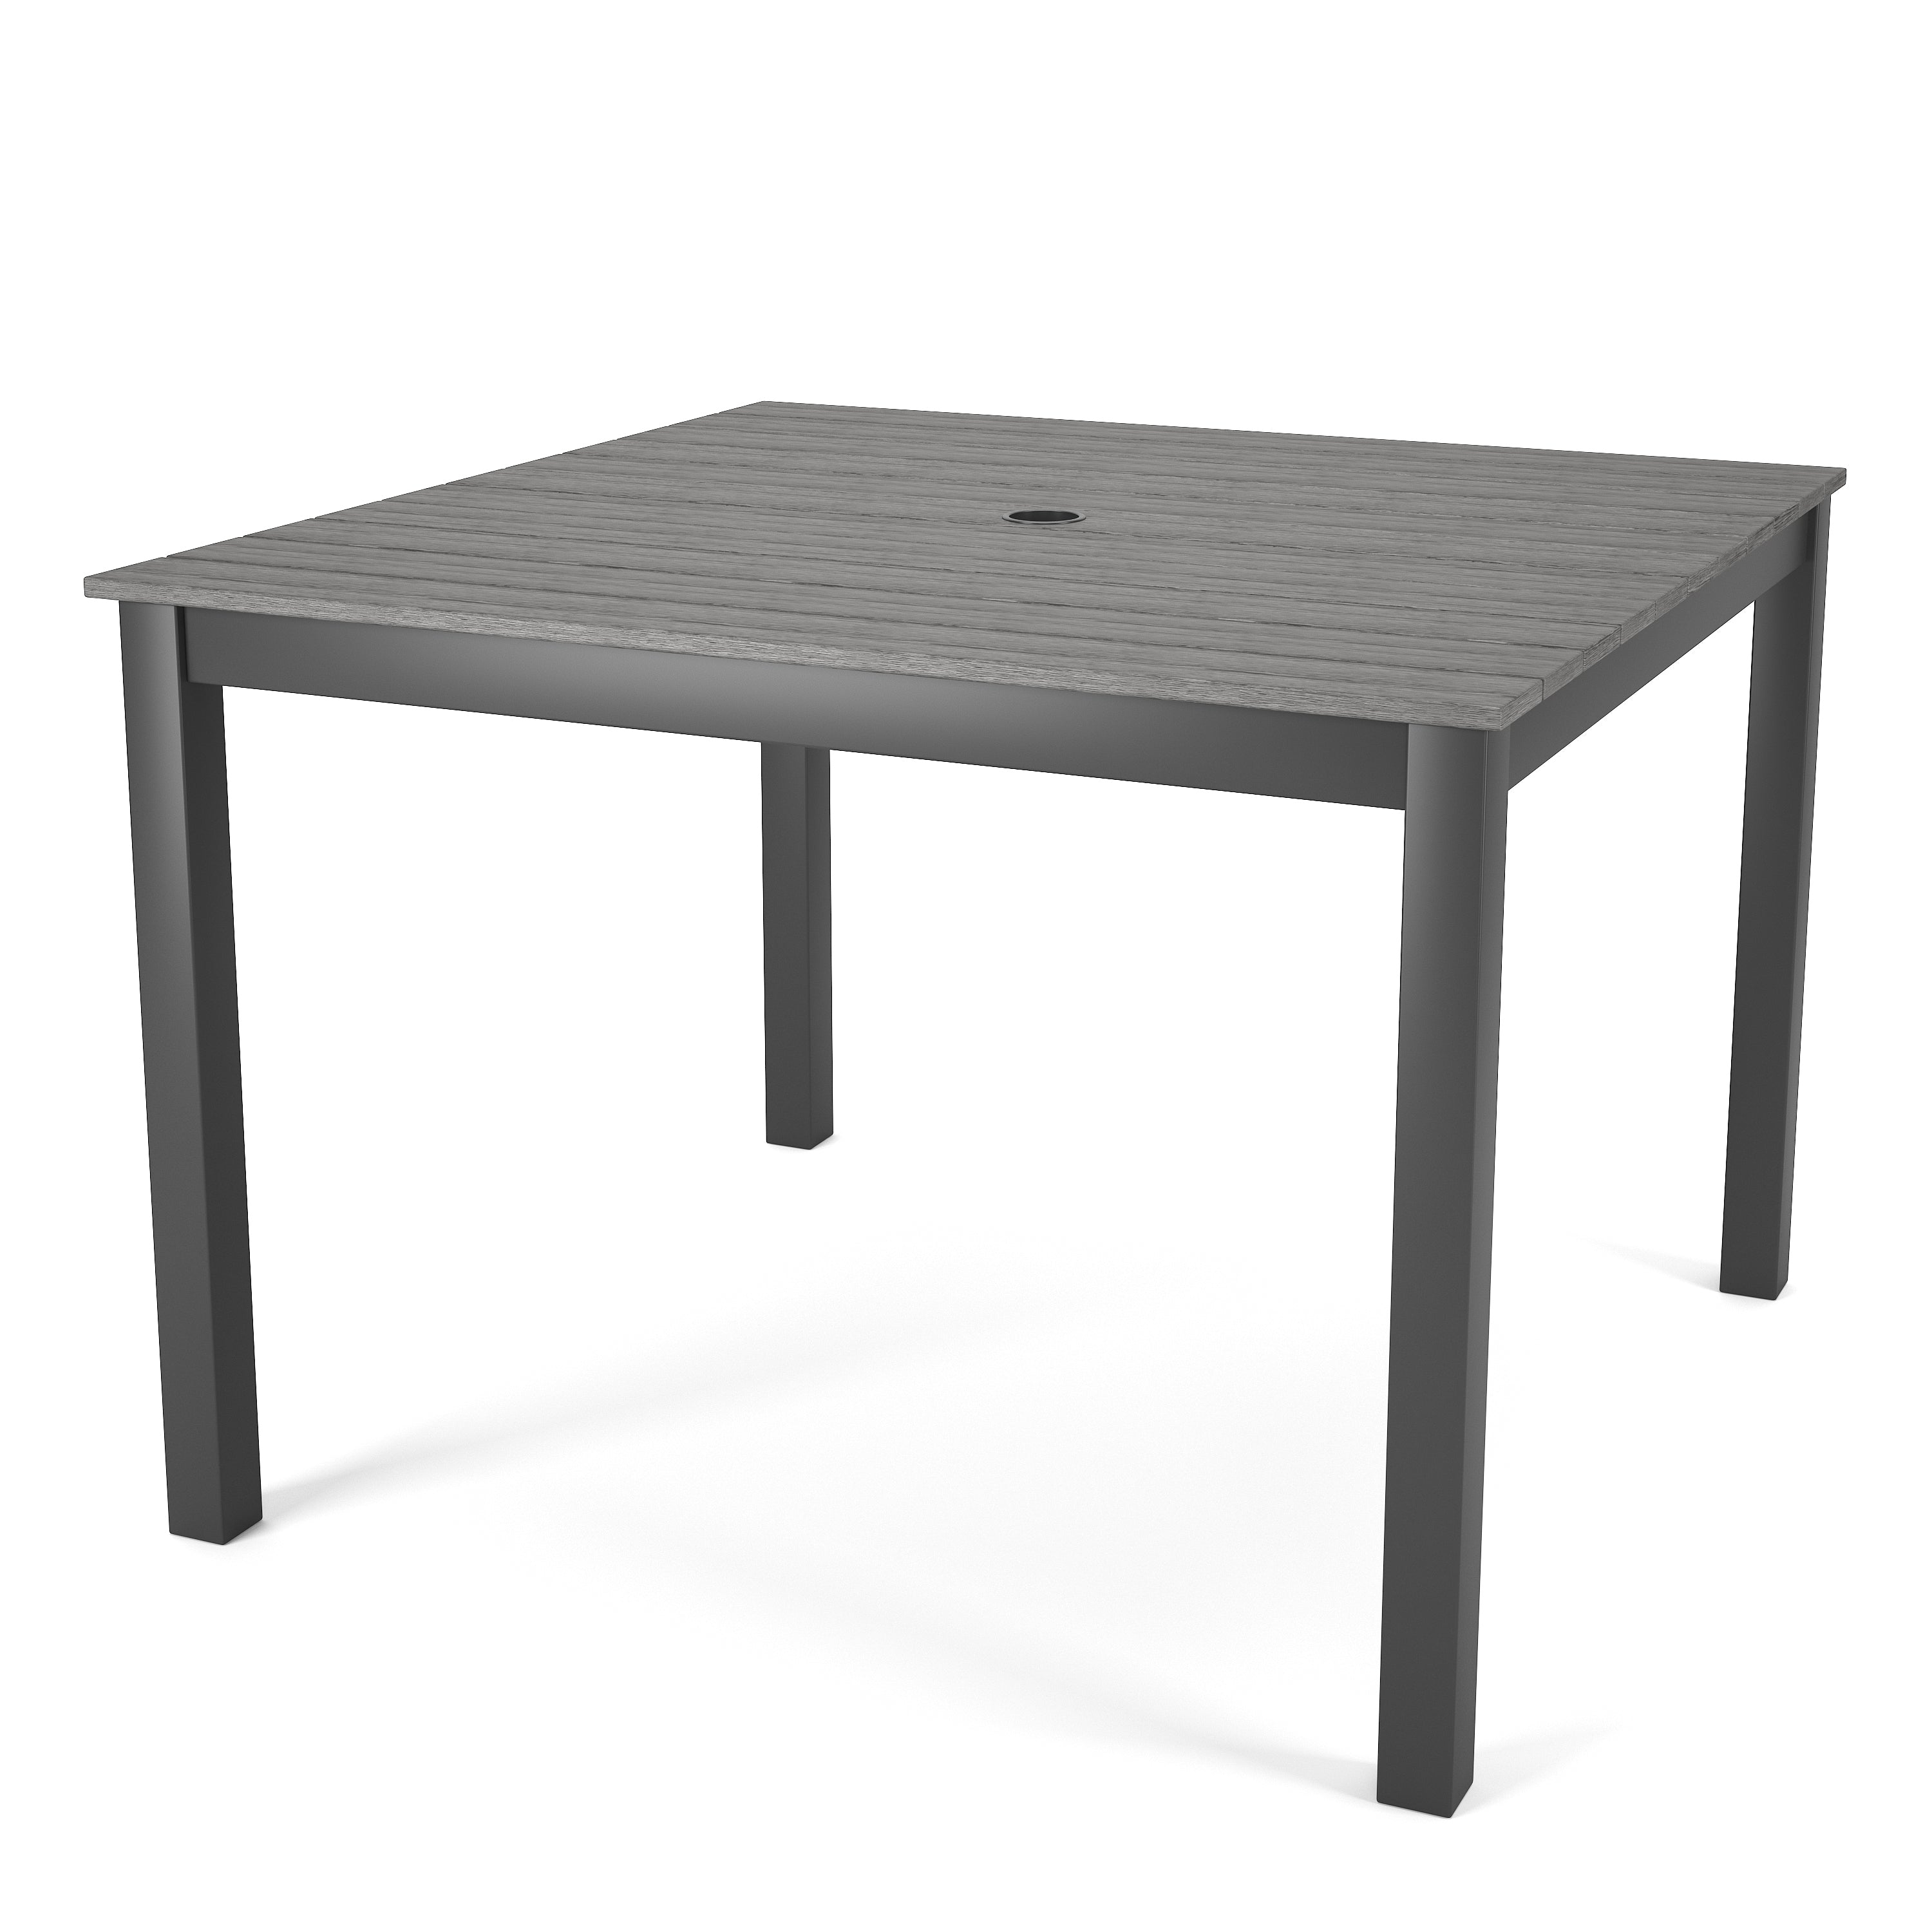 Forever Patio Chalfonte 41" Square Dining Table with Umbrella Hole by NorthCape International